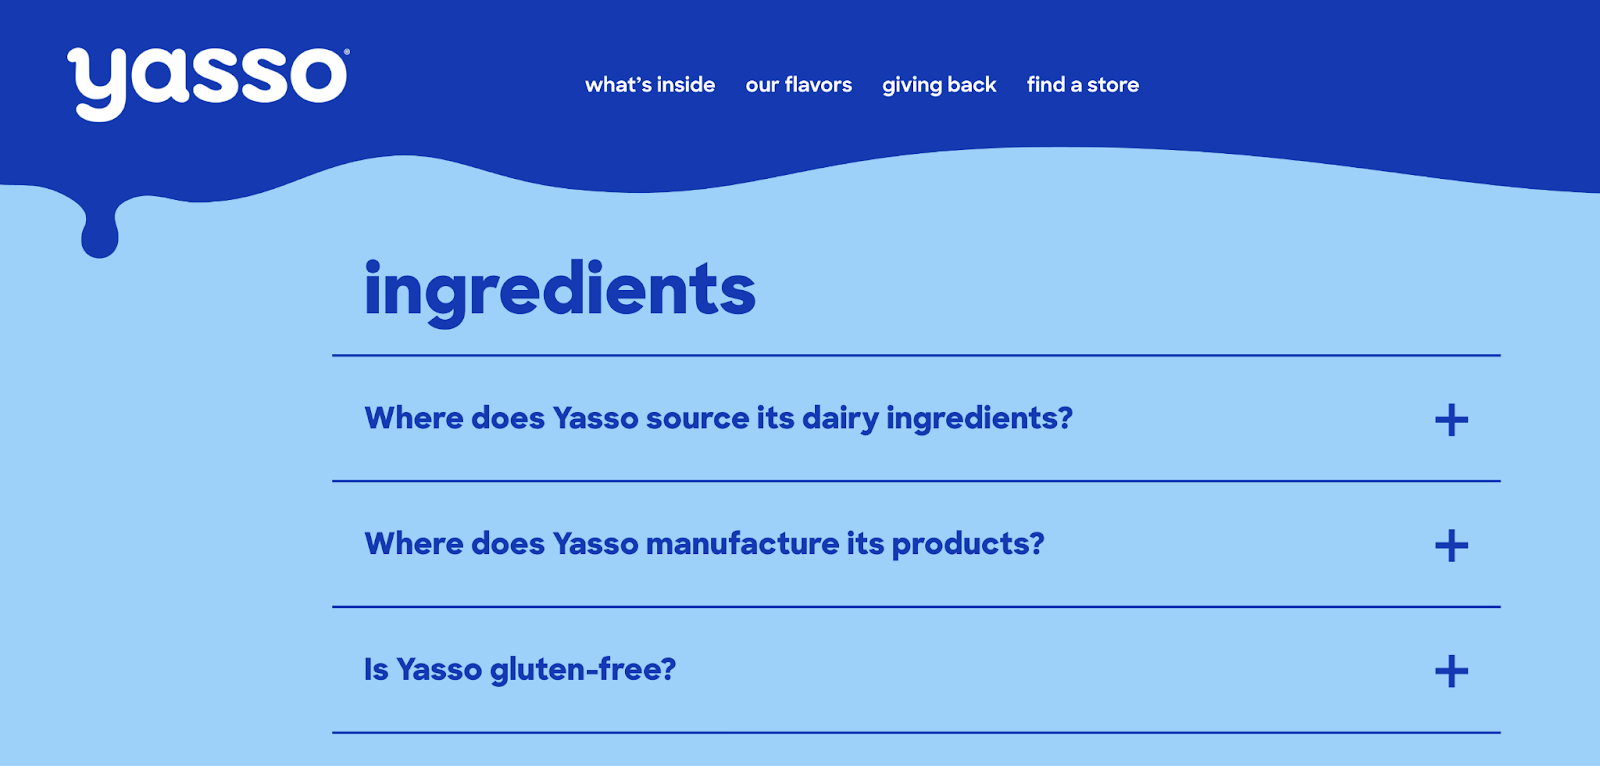 yasso driblet  down   paper   reveals answers to questions astir  ingredients